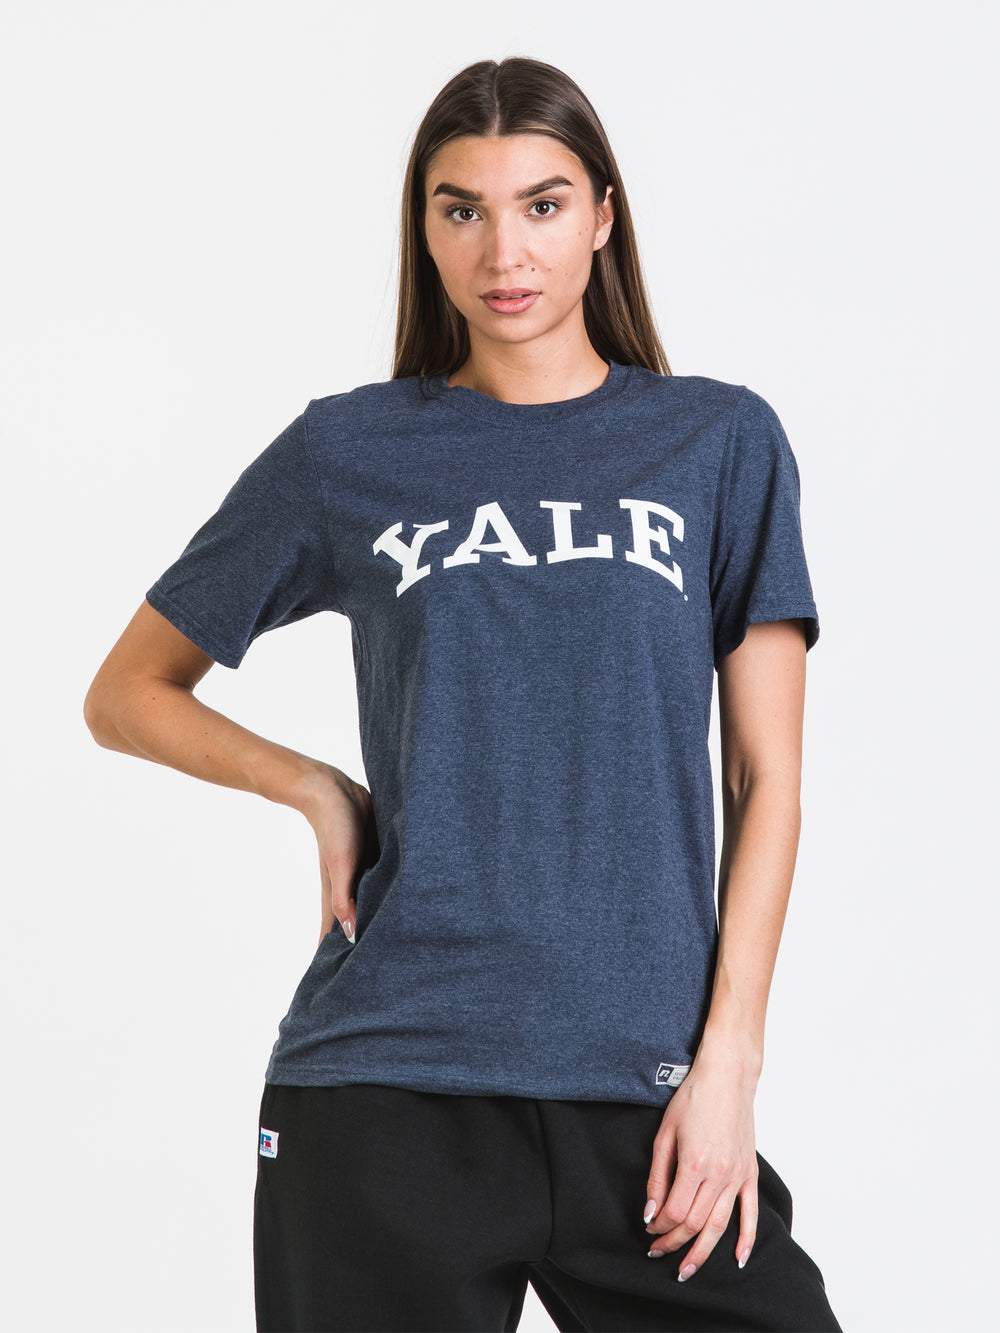 T-SHIRT RUSSELL YALE - DÉSTOCKAGE